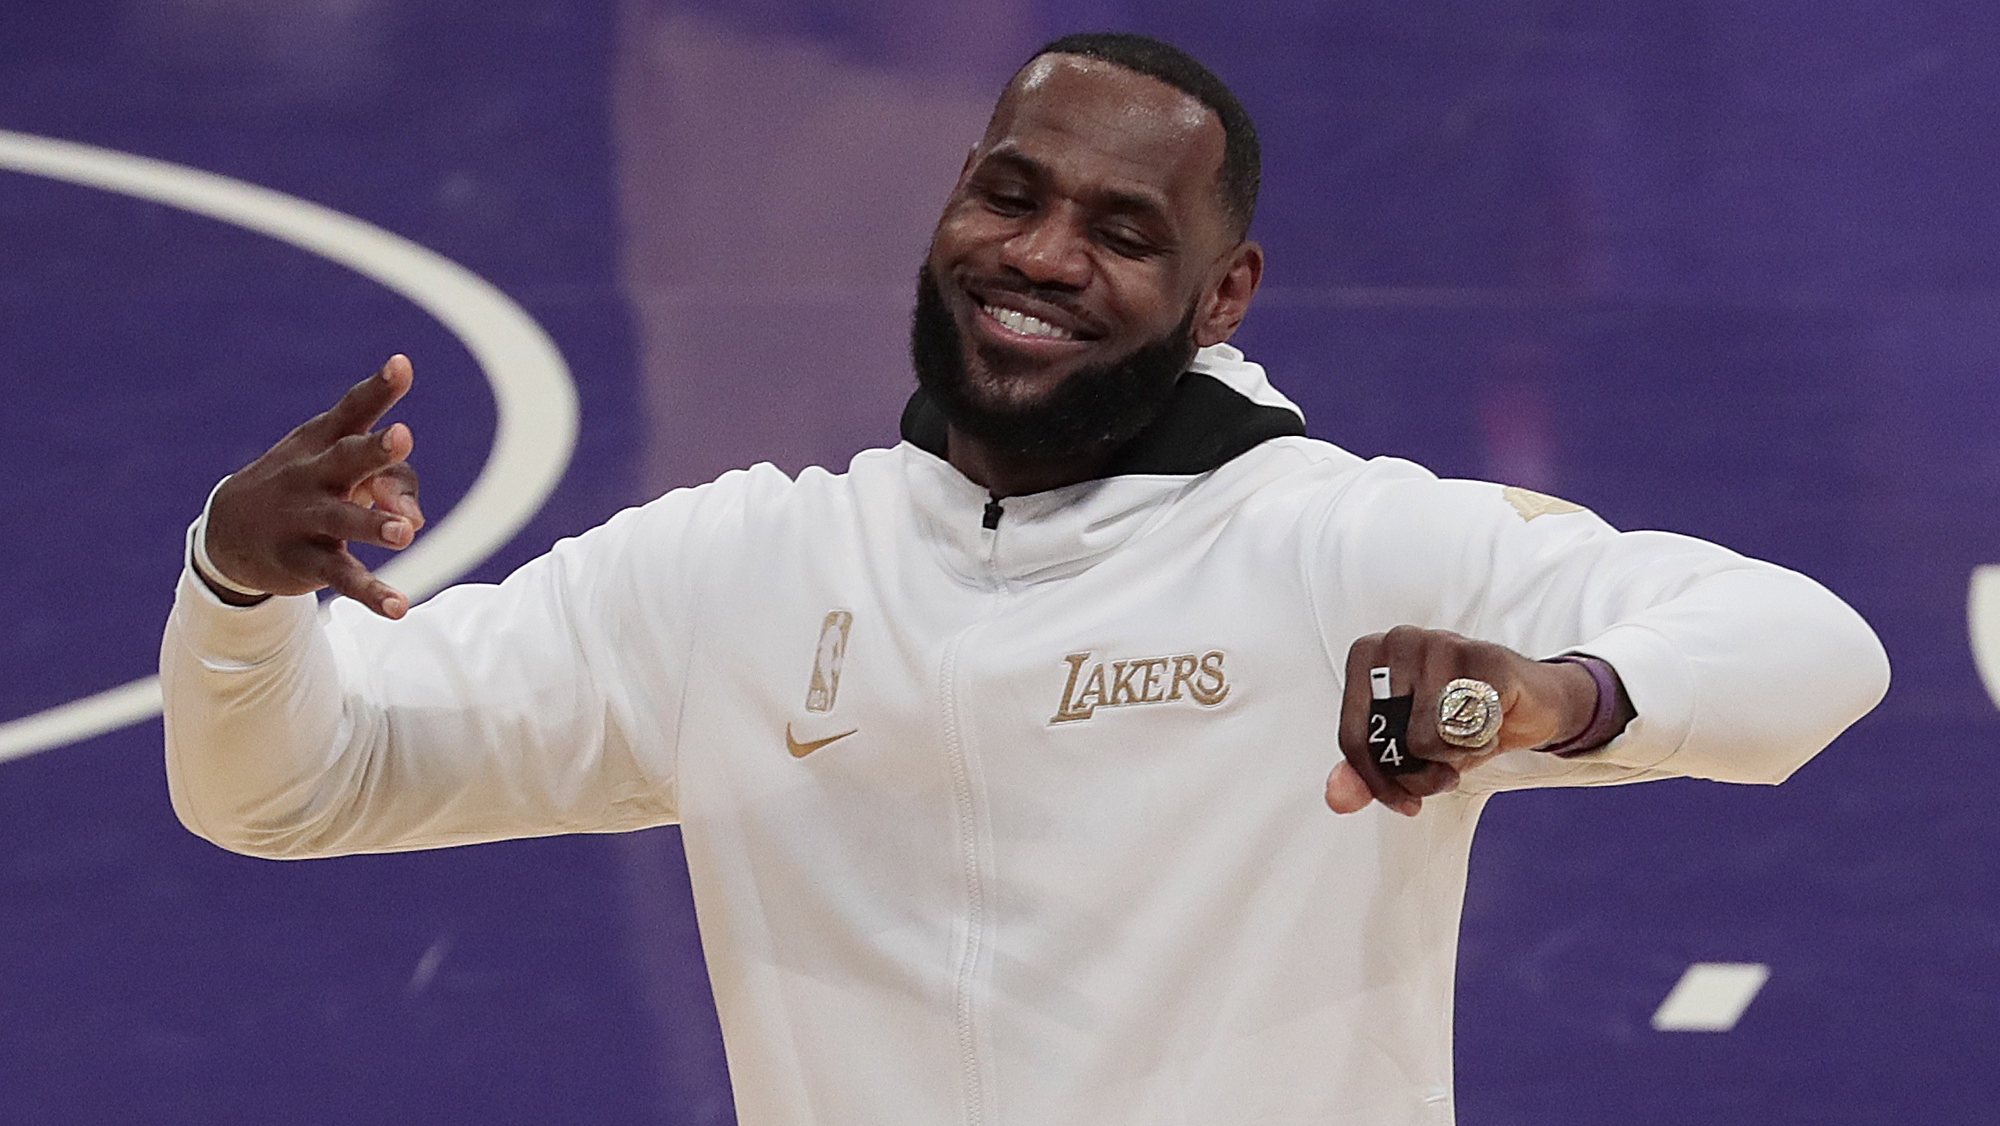 epa08900519 Los Angeles Lakers forward LeBron James  reacts after receiving his championship ring during a pre-game ceremony before the Lakers played the Los Angeles Clippers in their NBA game at the Staples Center in Los Angeles, California, USA, 22 December 2020.  EPA/ROBERT GAUTHIER / LOS ANGELES TIMES SHUTTERSTOCK OUT  EDITORIAL USE ONLY/NO SALES/NO ARCHIVES